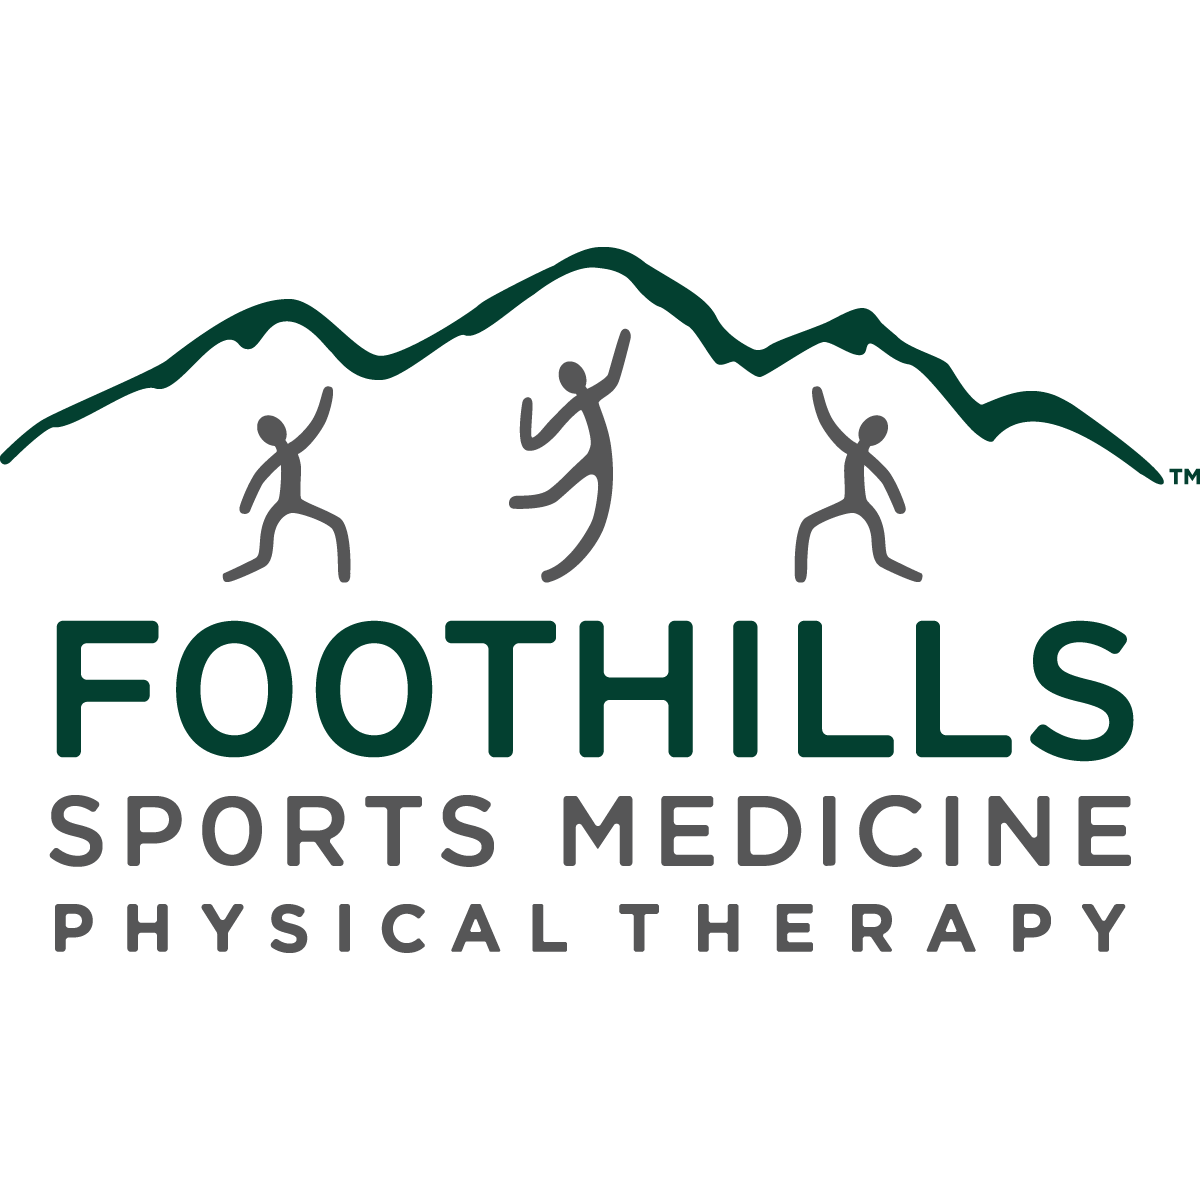 Foothills Physical Therapy & Sports Medicine - Scottsdale, AZ 85251 - (480)945-0030 | ShowMeLocal.com